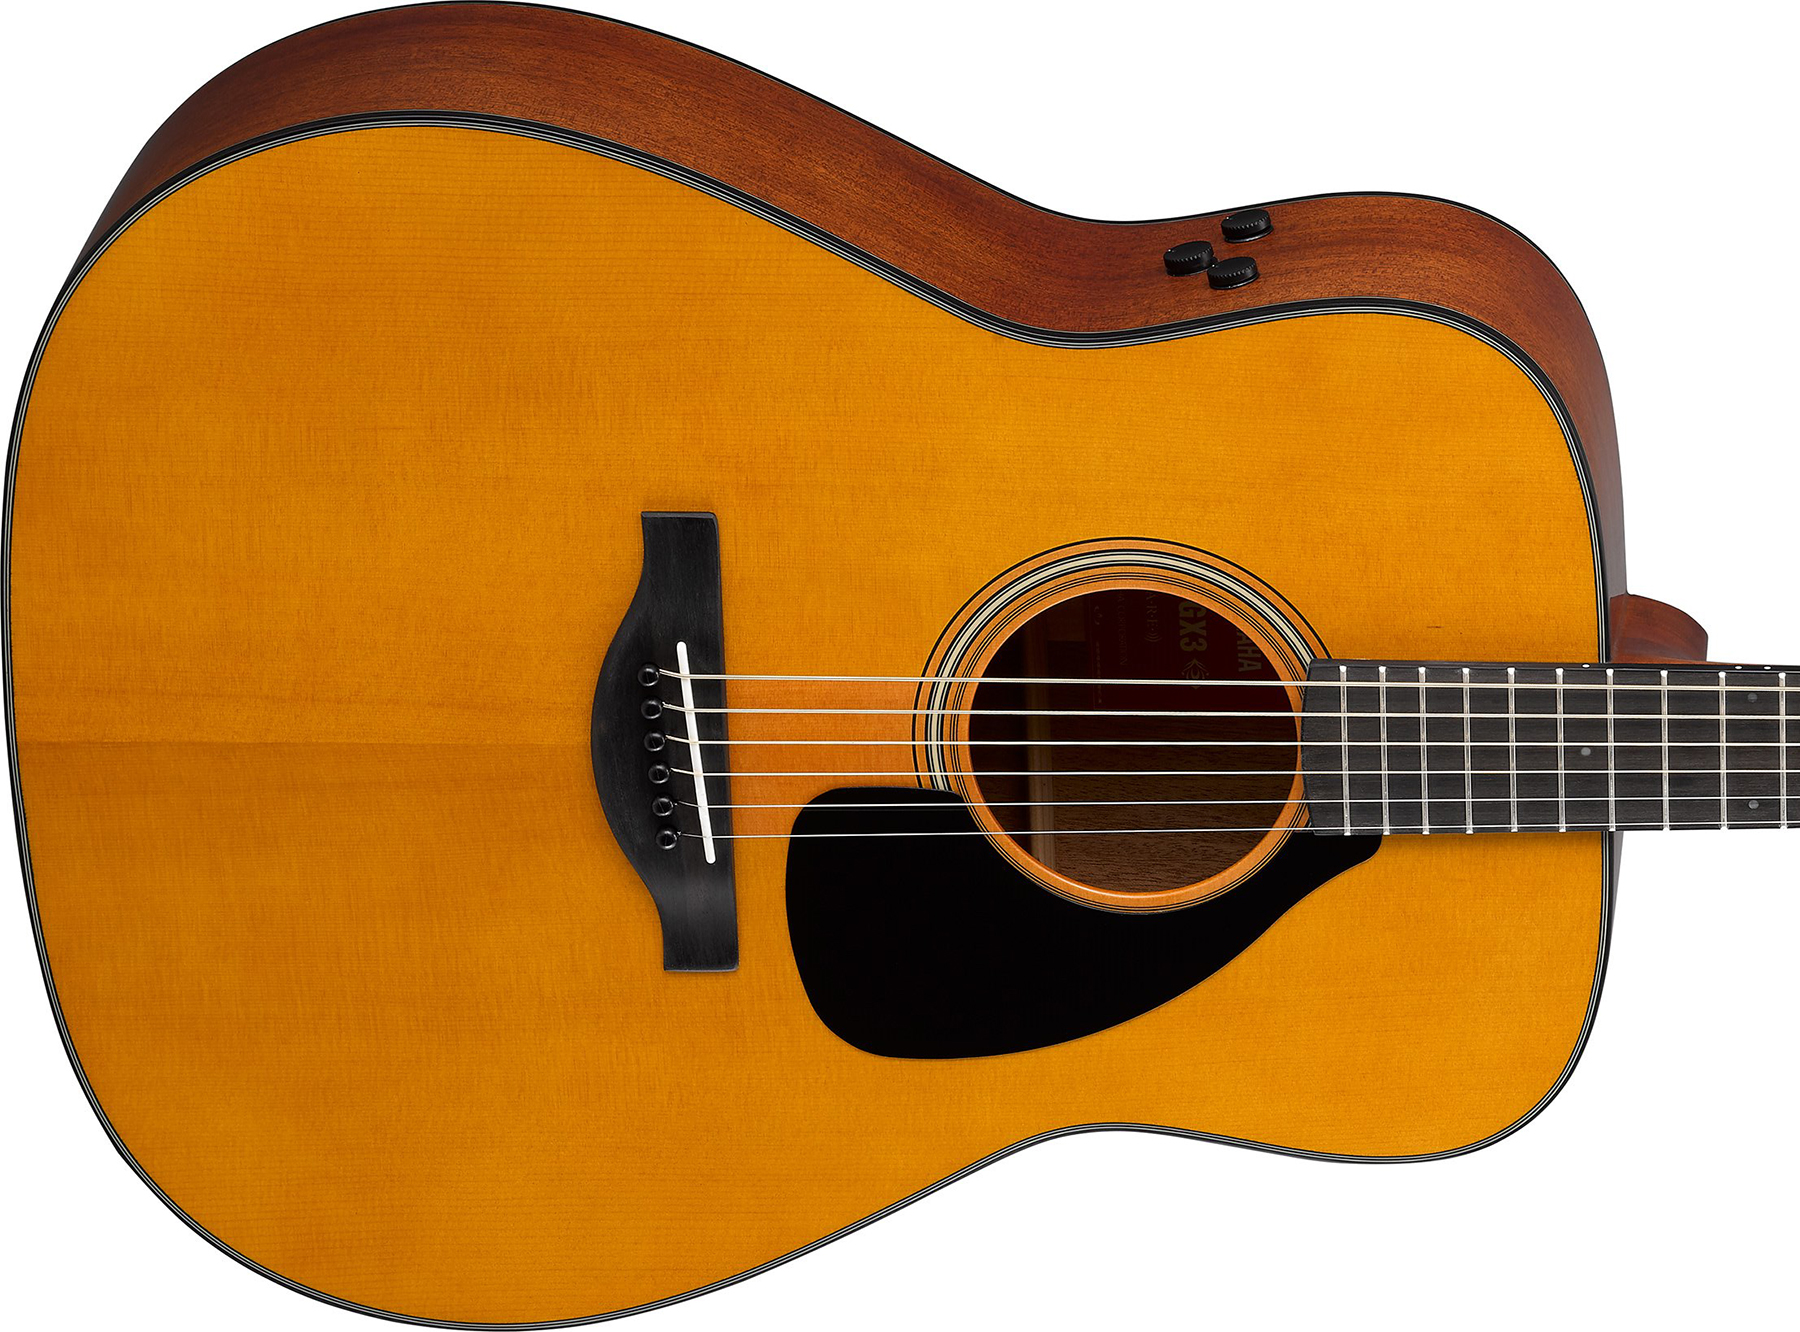 Yamaha Fgx3 Red Label Dreadnought Epicea Palissandre Eb - Heritage Natural - Westerngitarre & electro - Variation 2